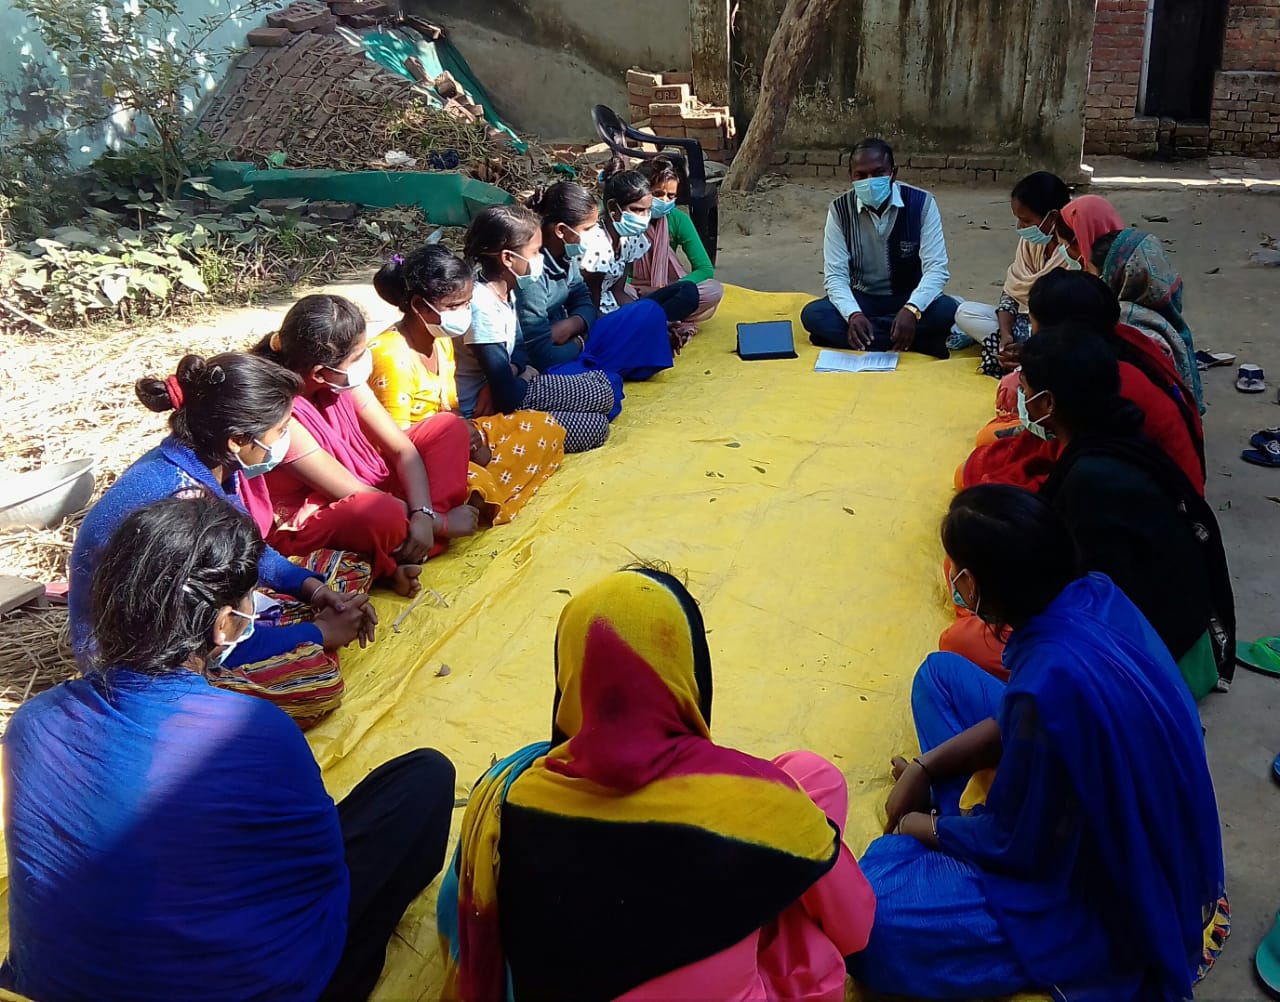 A group of youth sitting with an adult teacher on the ground in a village in India